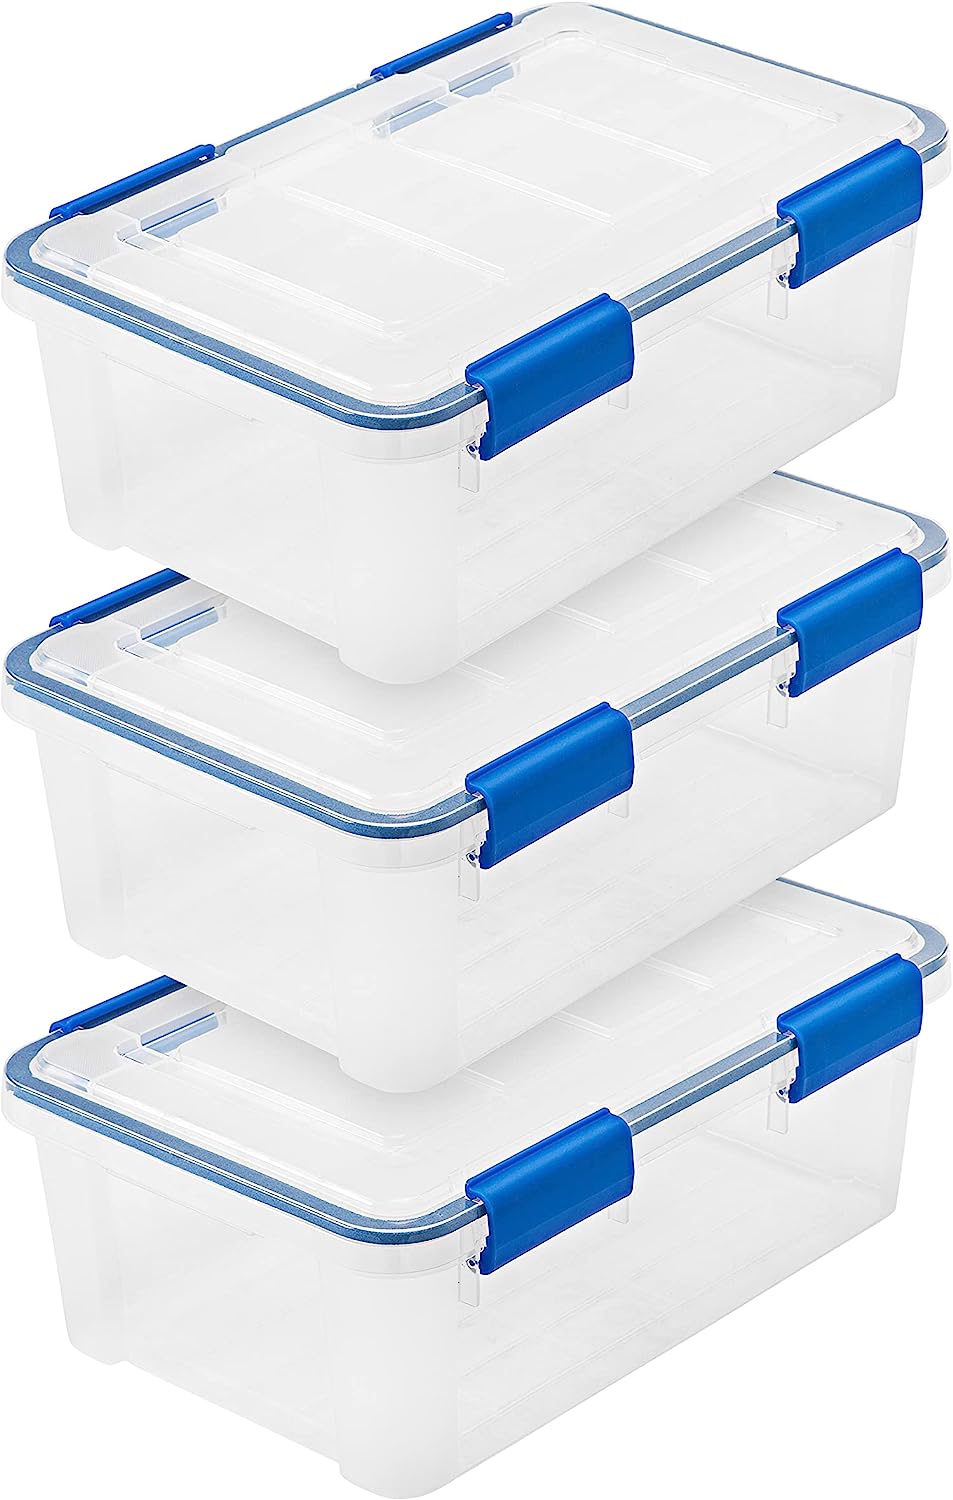 https://bigbigmart.com/wp-content/uploads/2023/06/IRIS-USA-16-Quart-WEATHERPRO-Plastic-Storage-Box-with-Durable-Lid-and-Seal-and-Secure-Latching-Buckles-Clear-With-Blue-Buckles-Weathertight-3-Pack.jpg